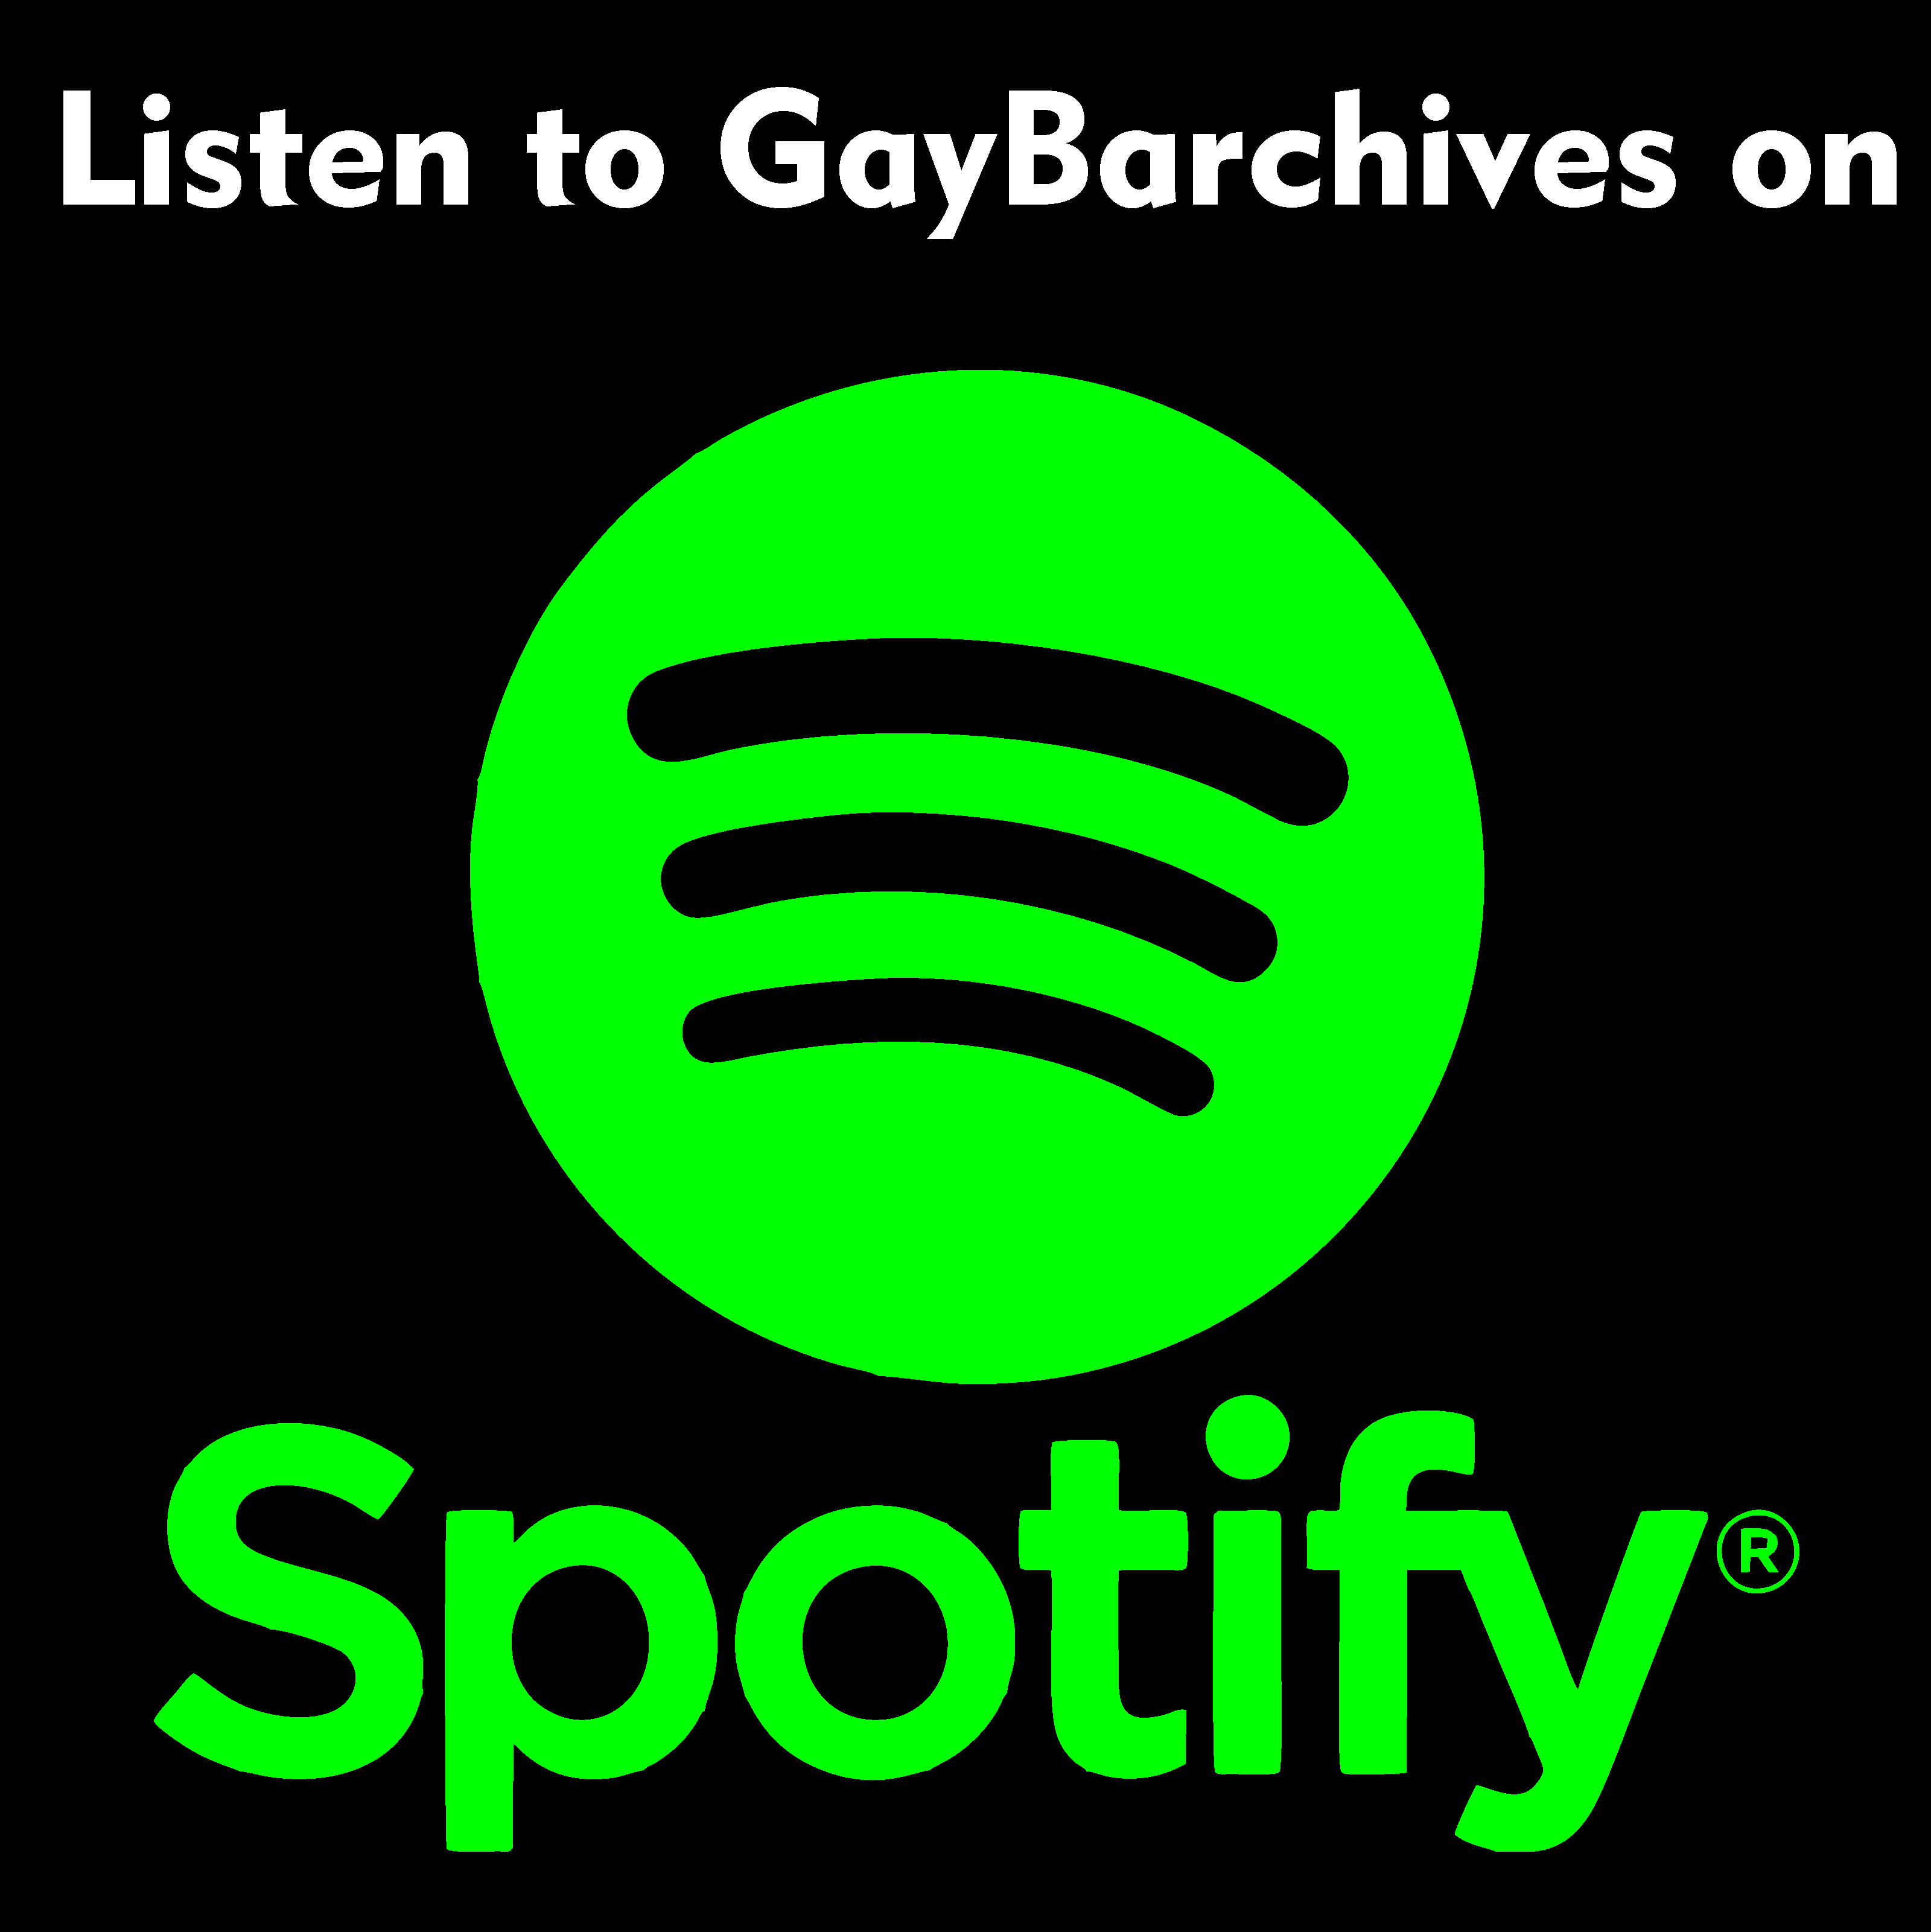 Listen to our GayBarchives podcast on Spotify #ilovegaybars #lgbthistory